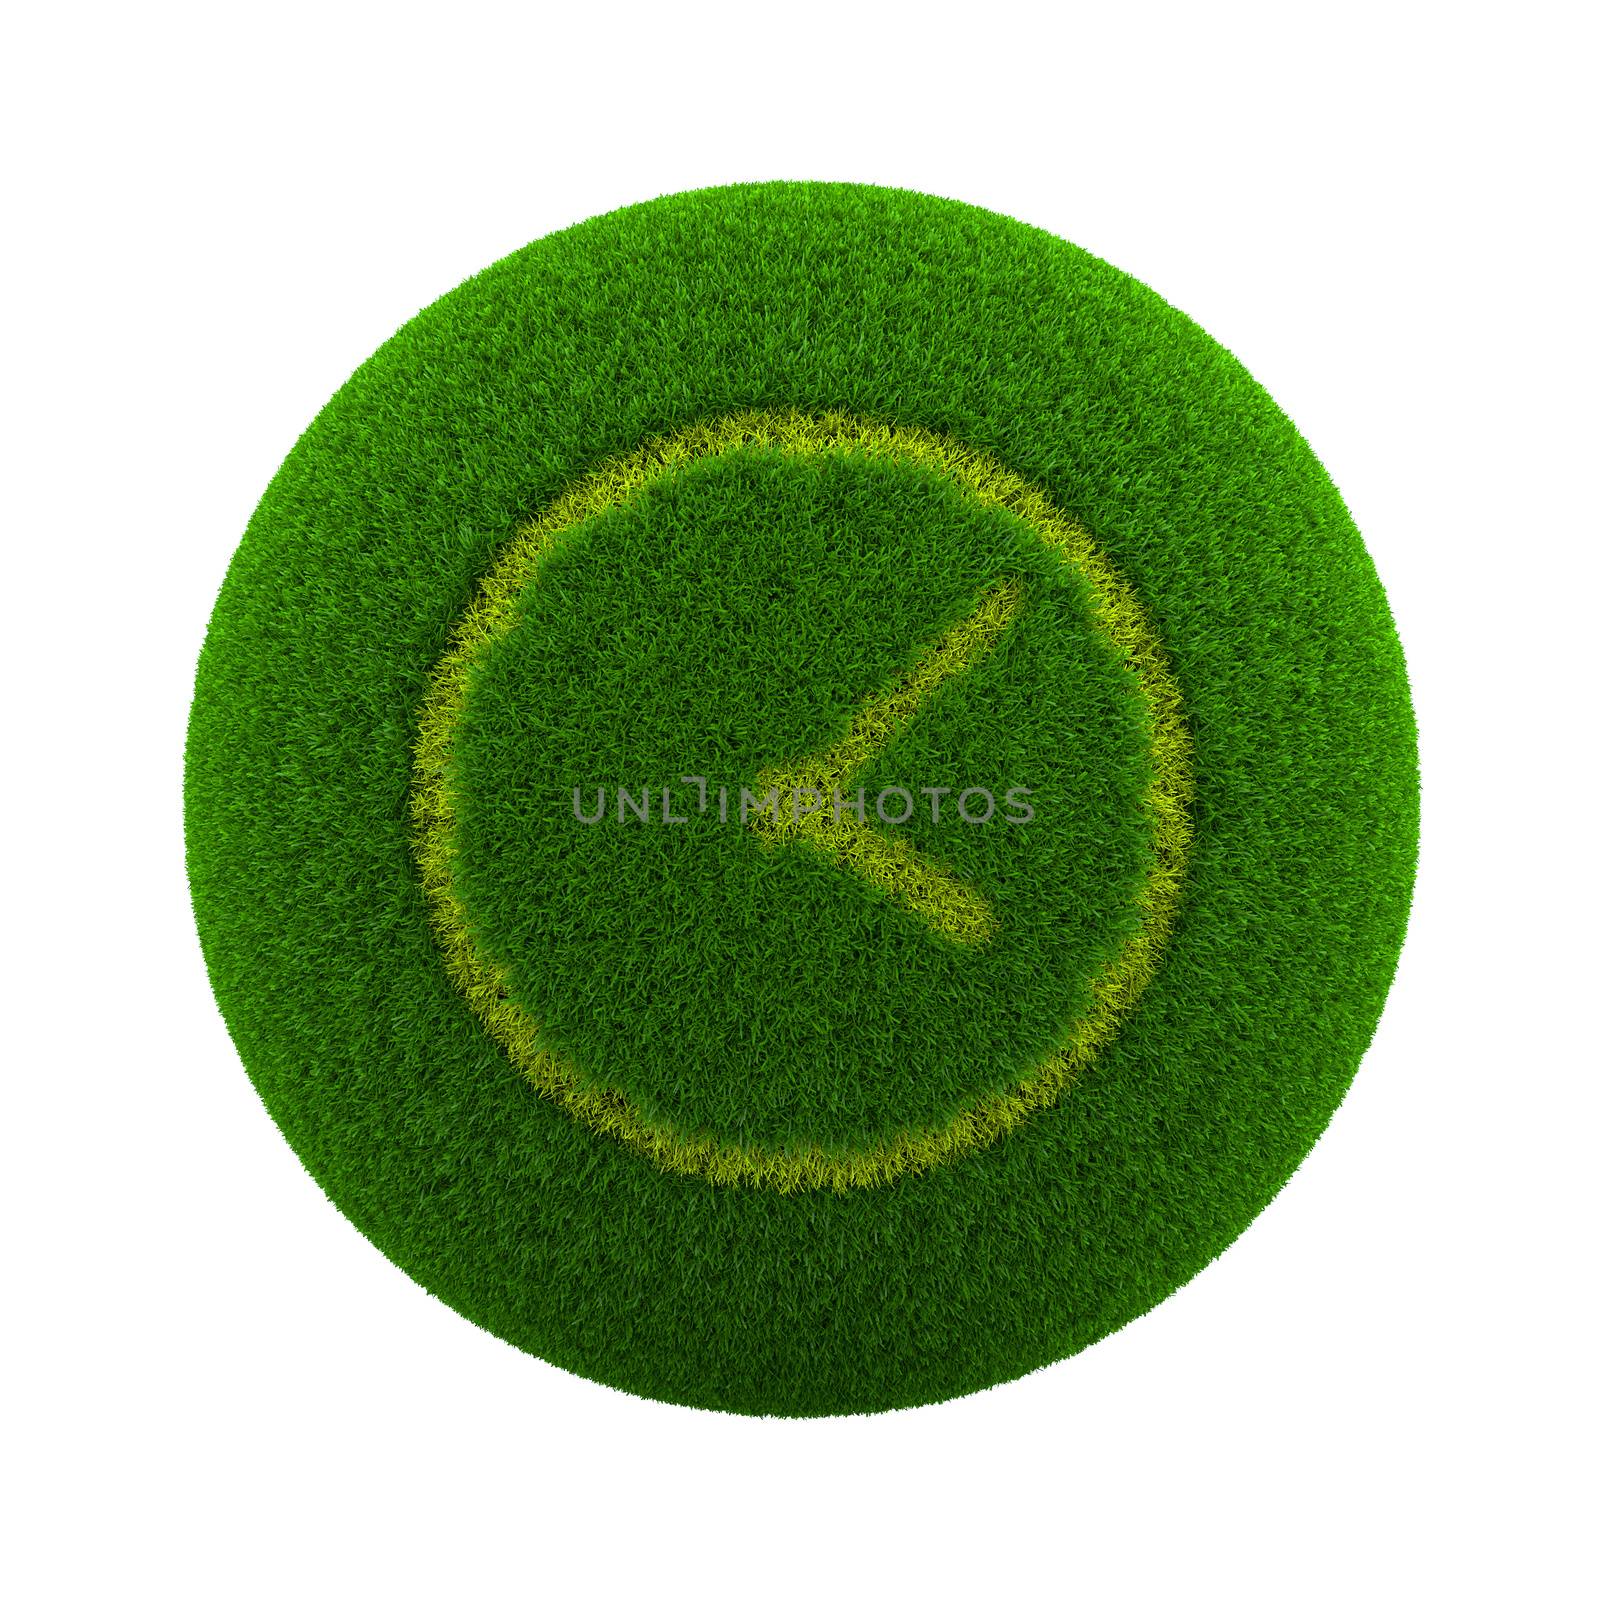 Green Globe with Grass Cutted in the Shape of a Clock Symbol 3D Illustration Isolated on White Background